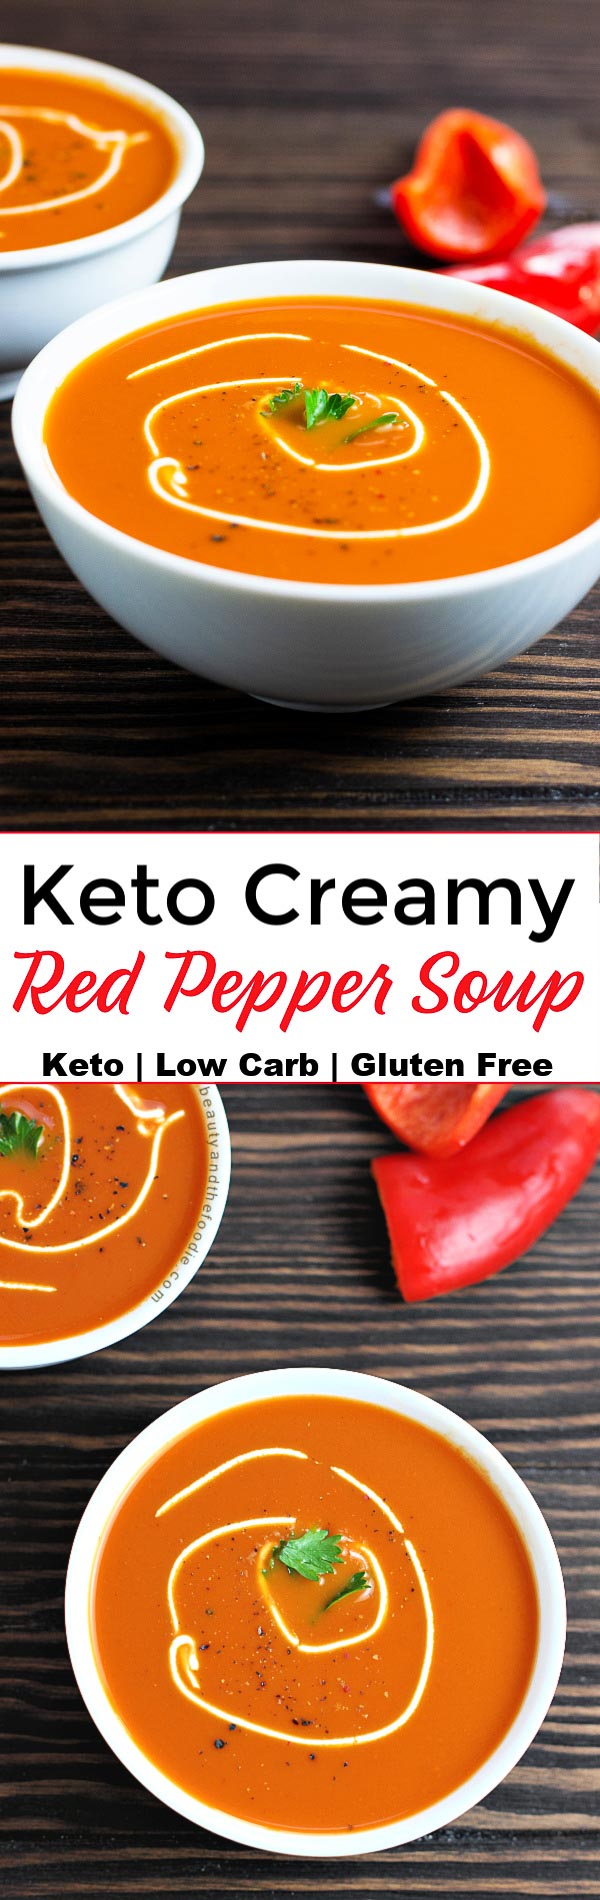 Keto Creamy Roasted Red Pepper Soup